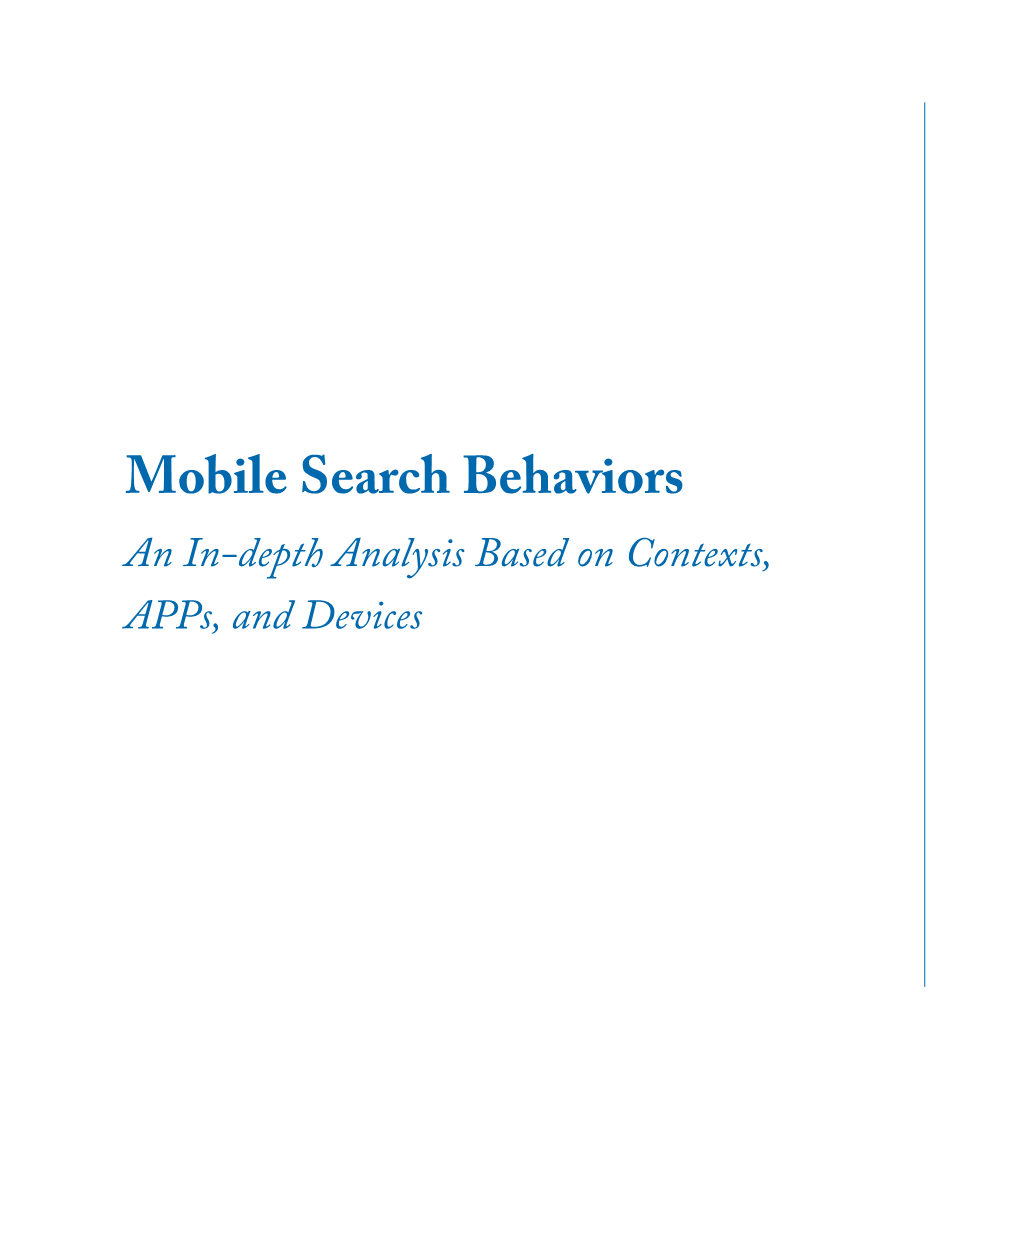 Mobile Search Behaviors an In-Depth Analysis Based on Contexts, Apps, and Devices